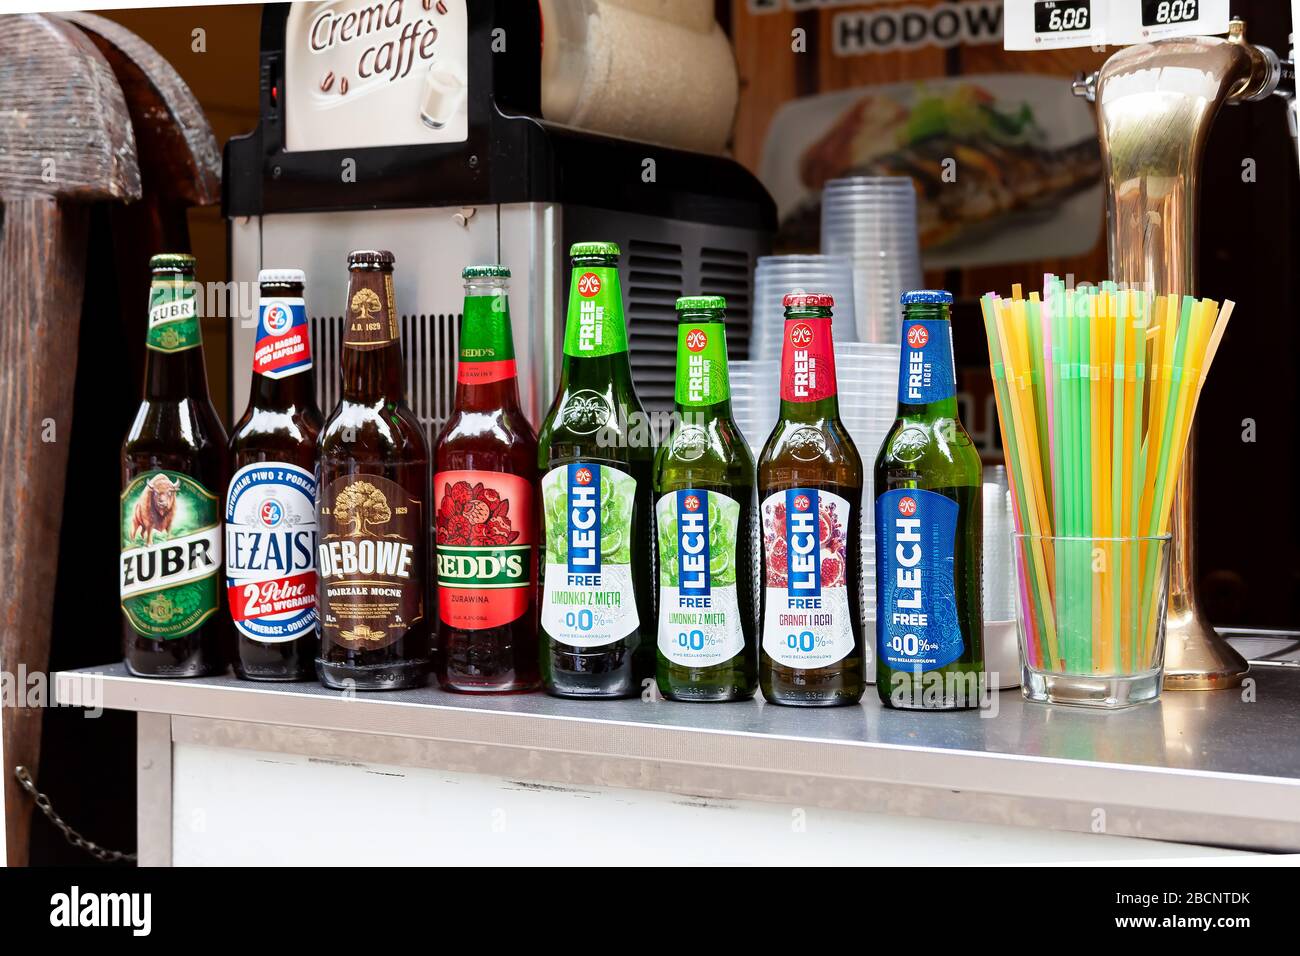 Set of Polish beer bottles in a row, various brands, many alcohol bottles and plastic straws in container Żubr, Leżajsk, Dębowe, Lech, Redd's and 0% Stock Photo